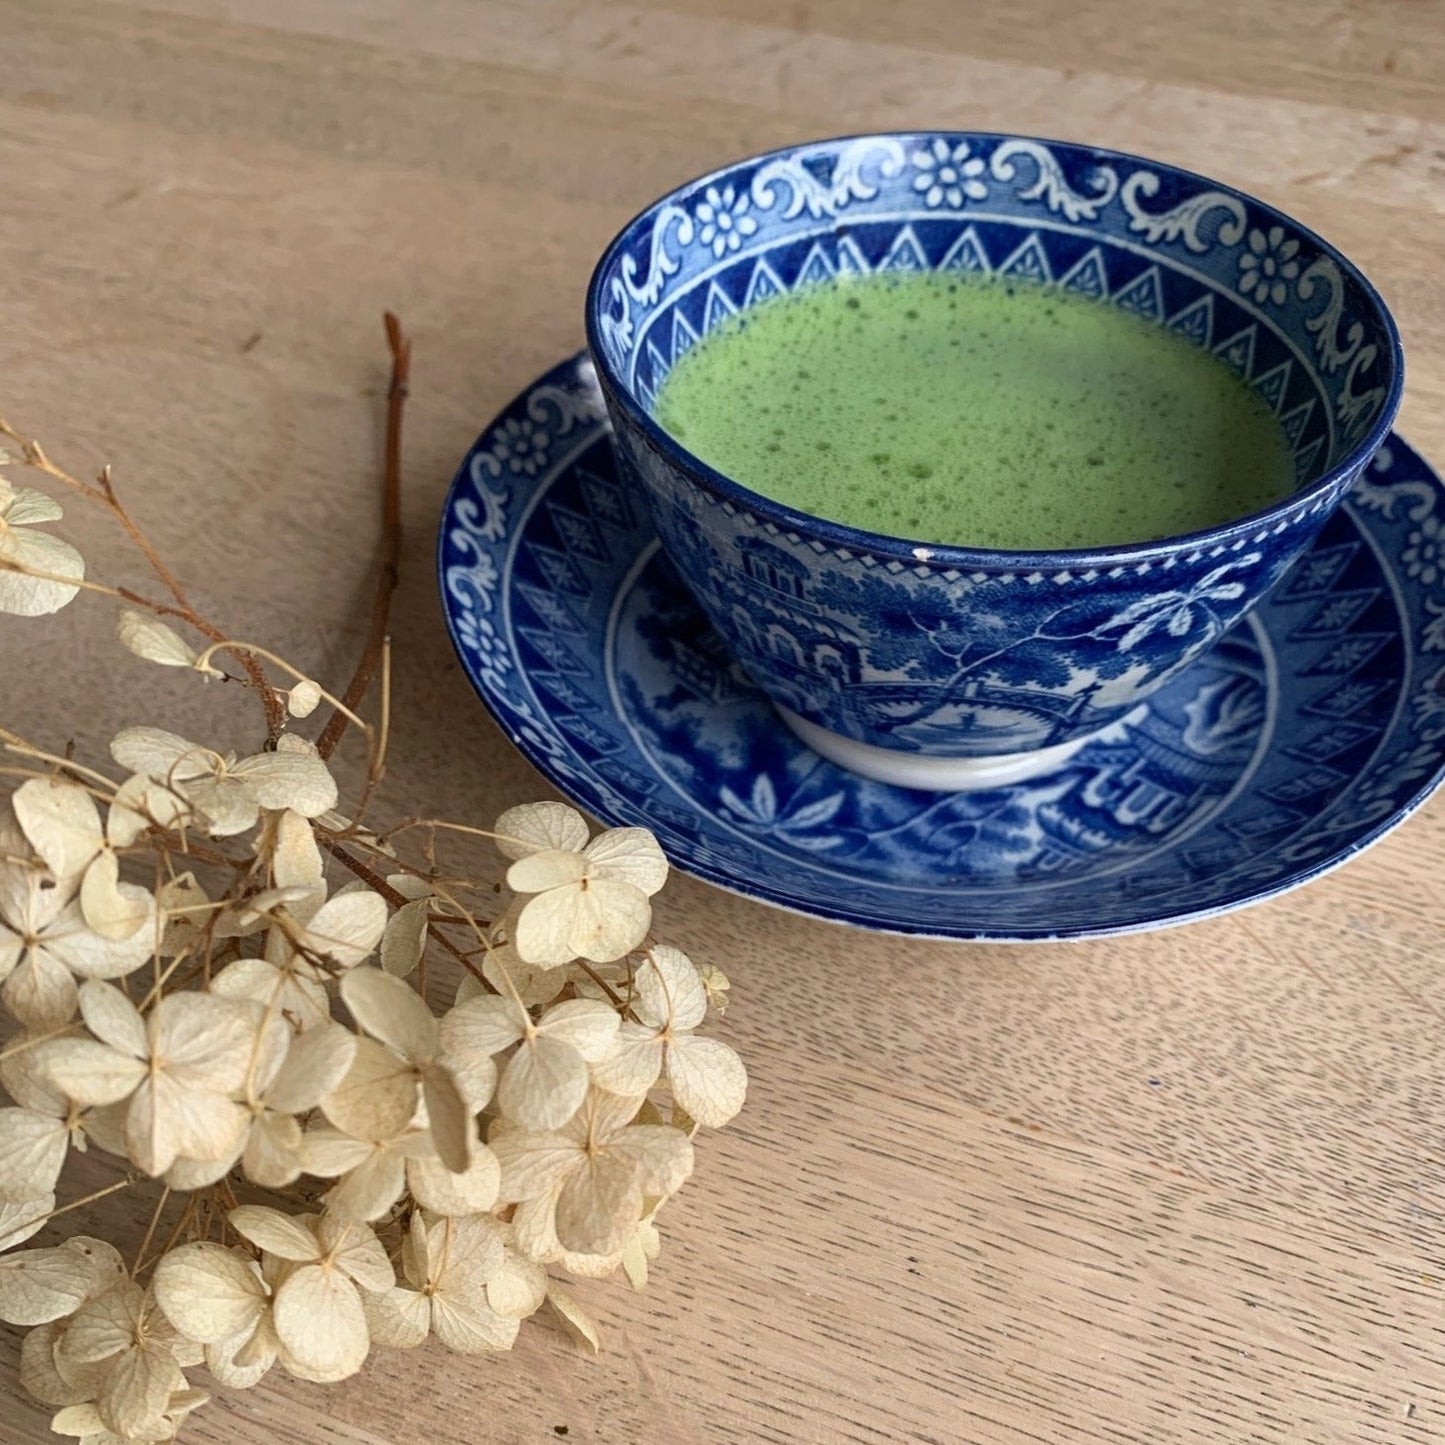 Matcha Tasting Workshop @ The Factory, Dalston - 9th & 10th March